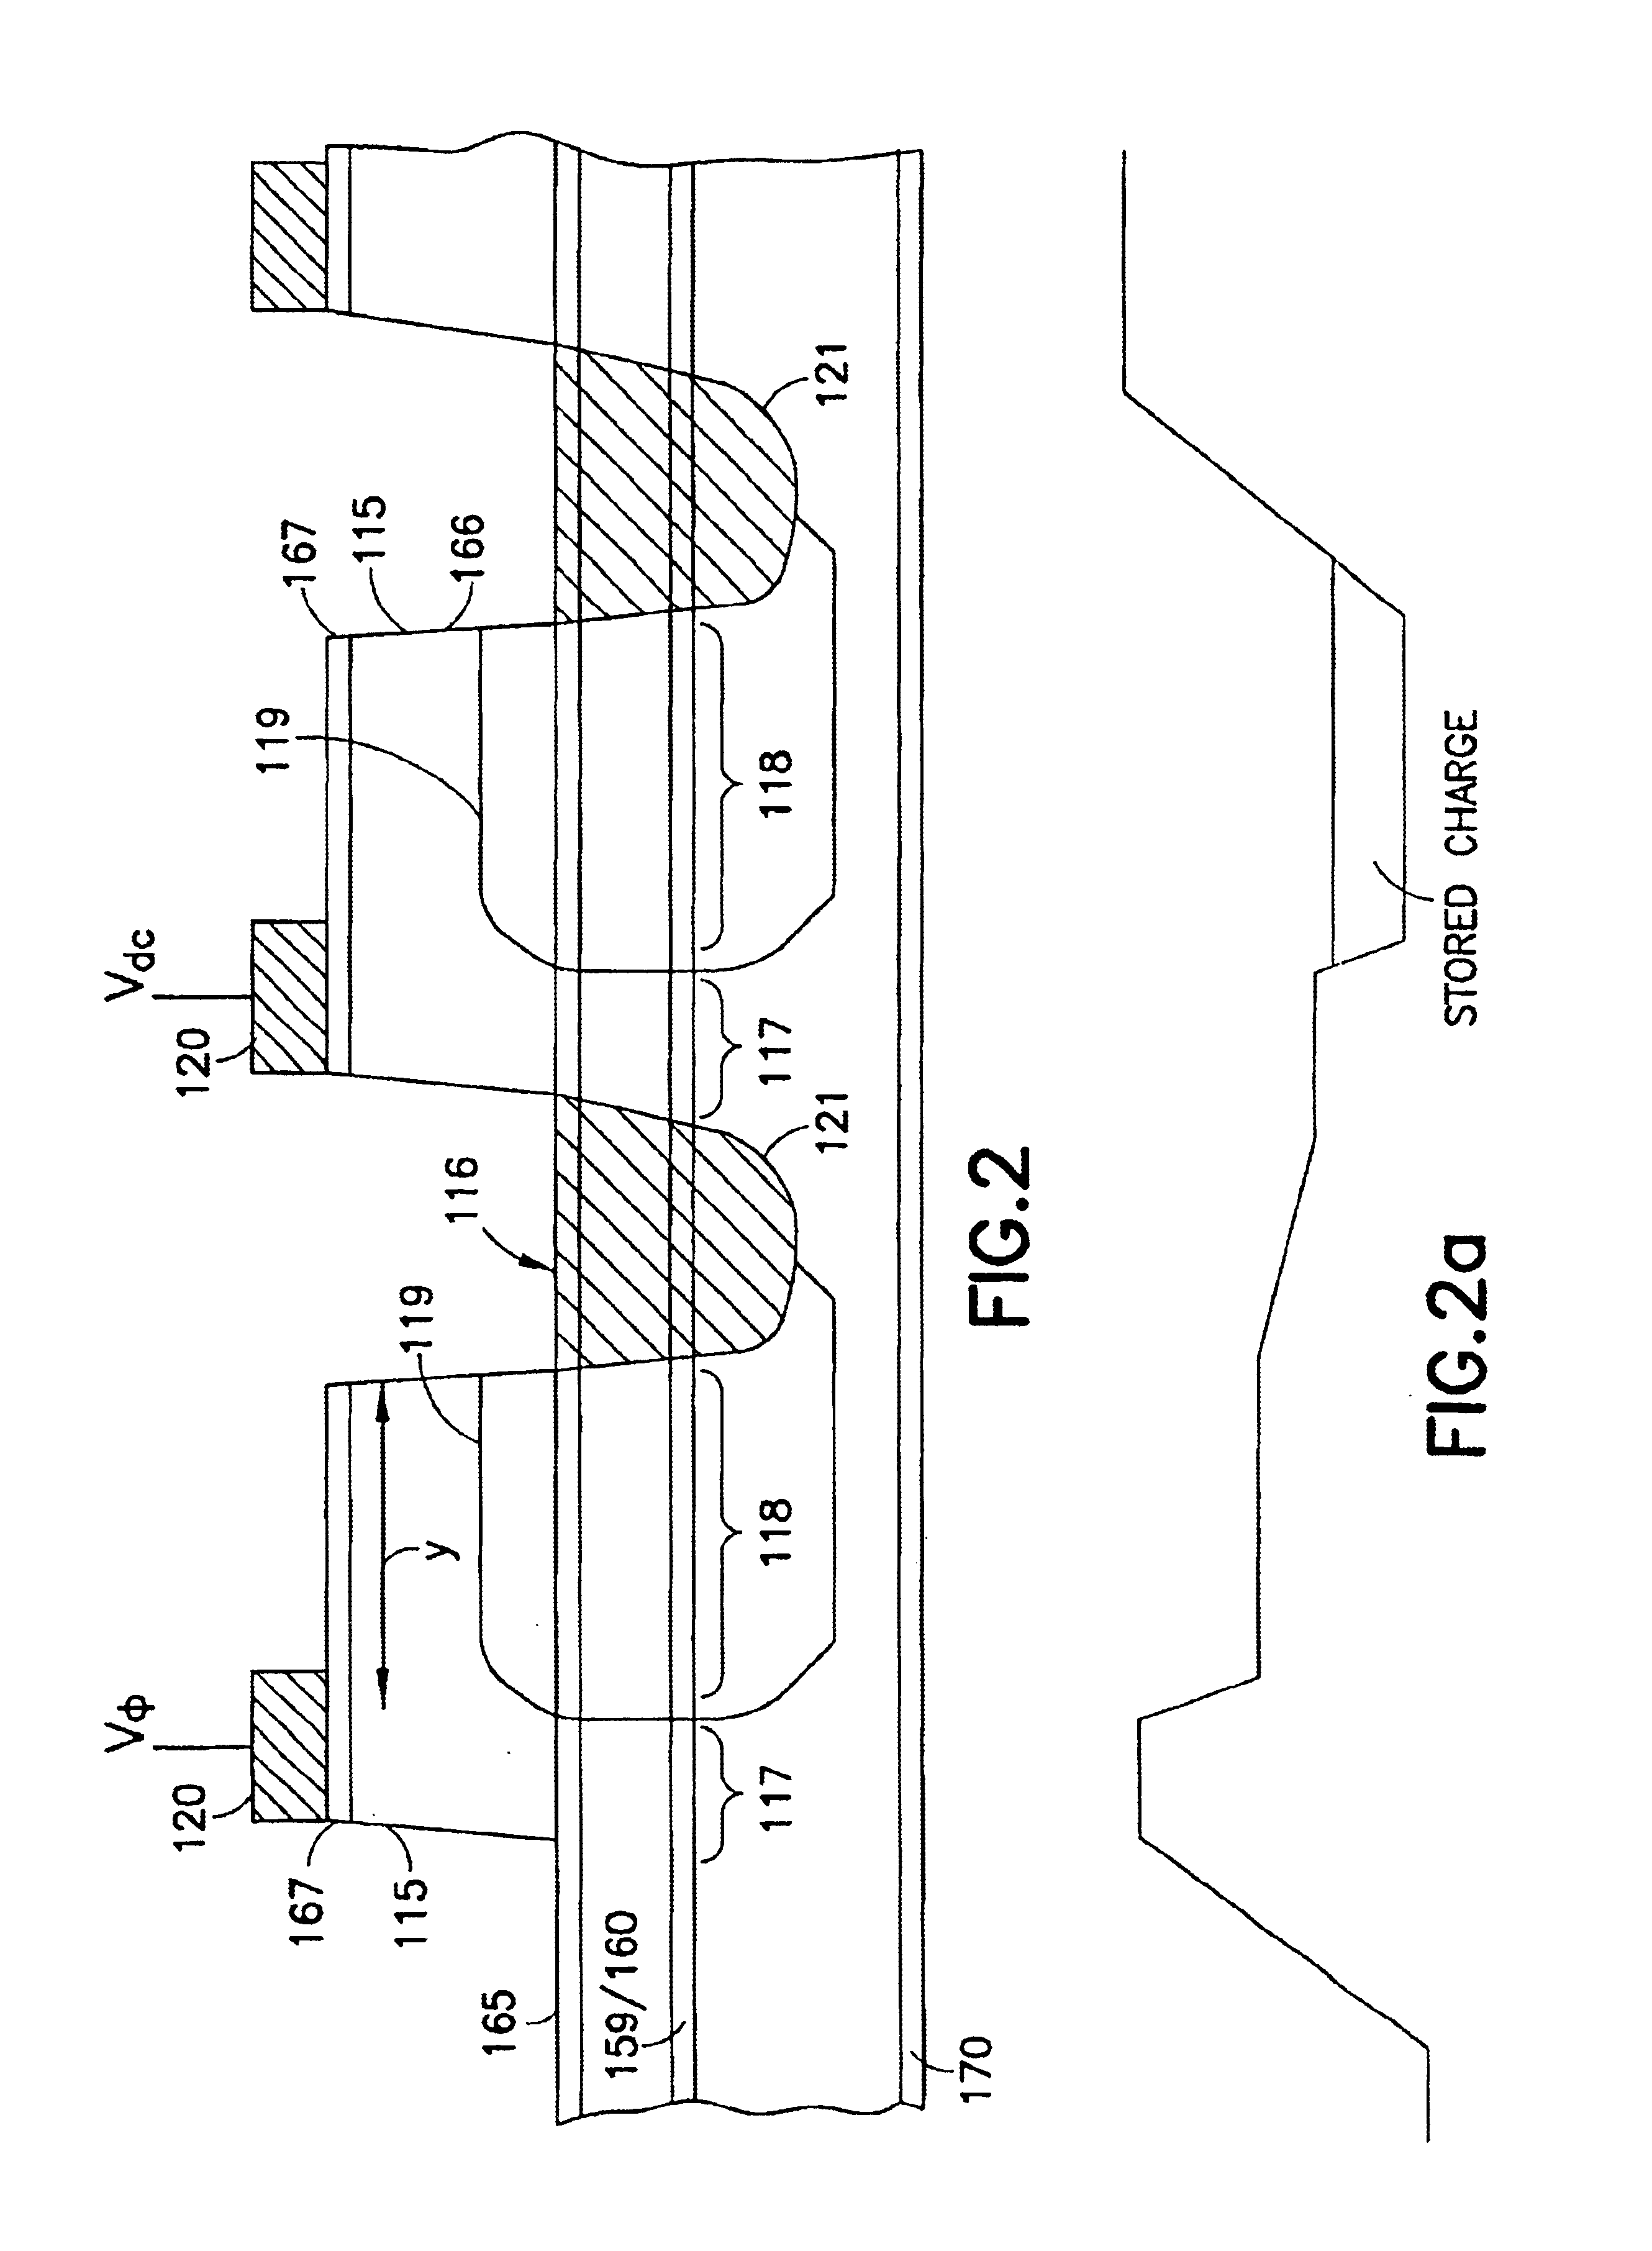 III-V charge coupled device suitable for visible, near and far infra-red detection